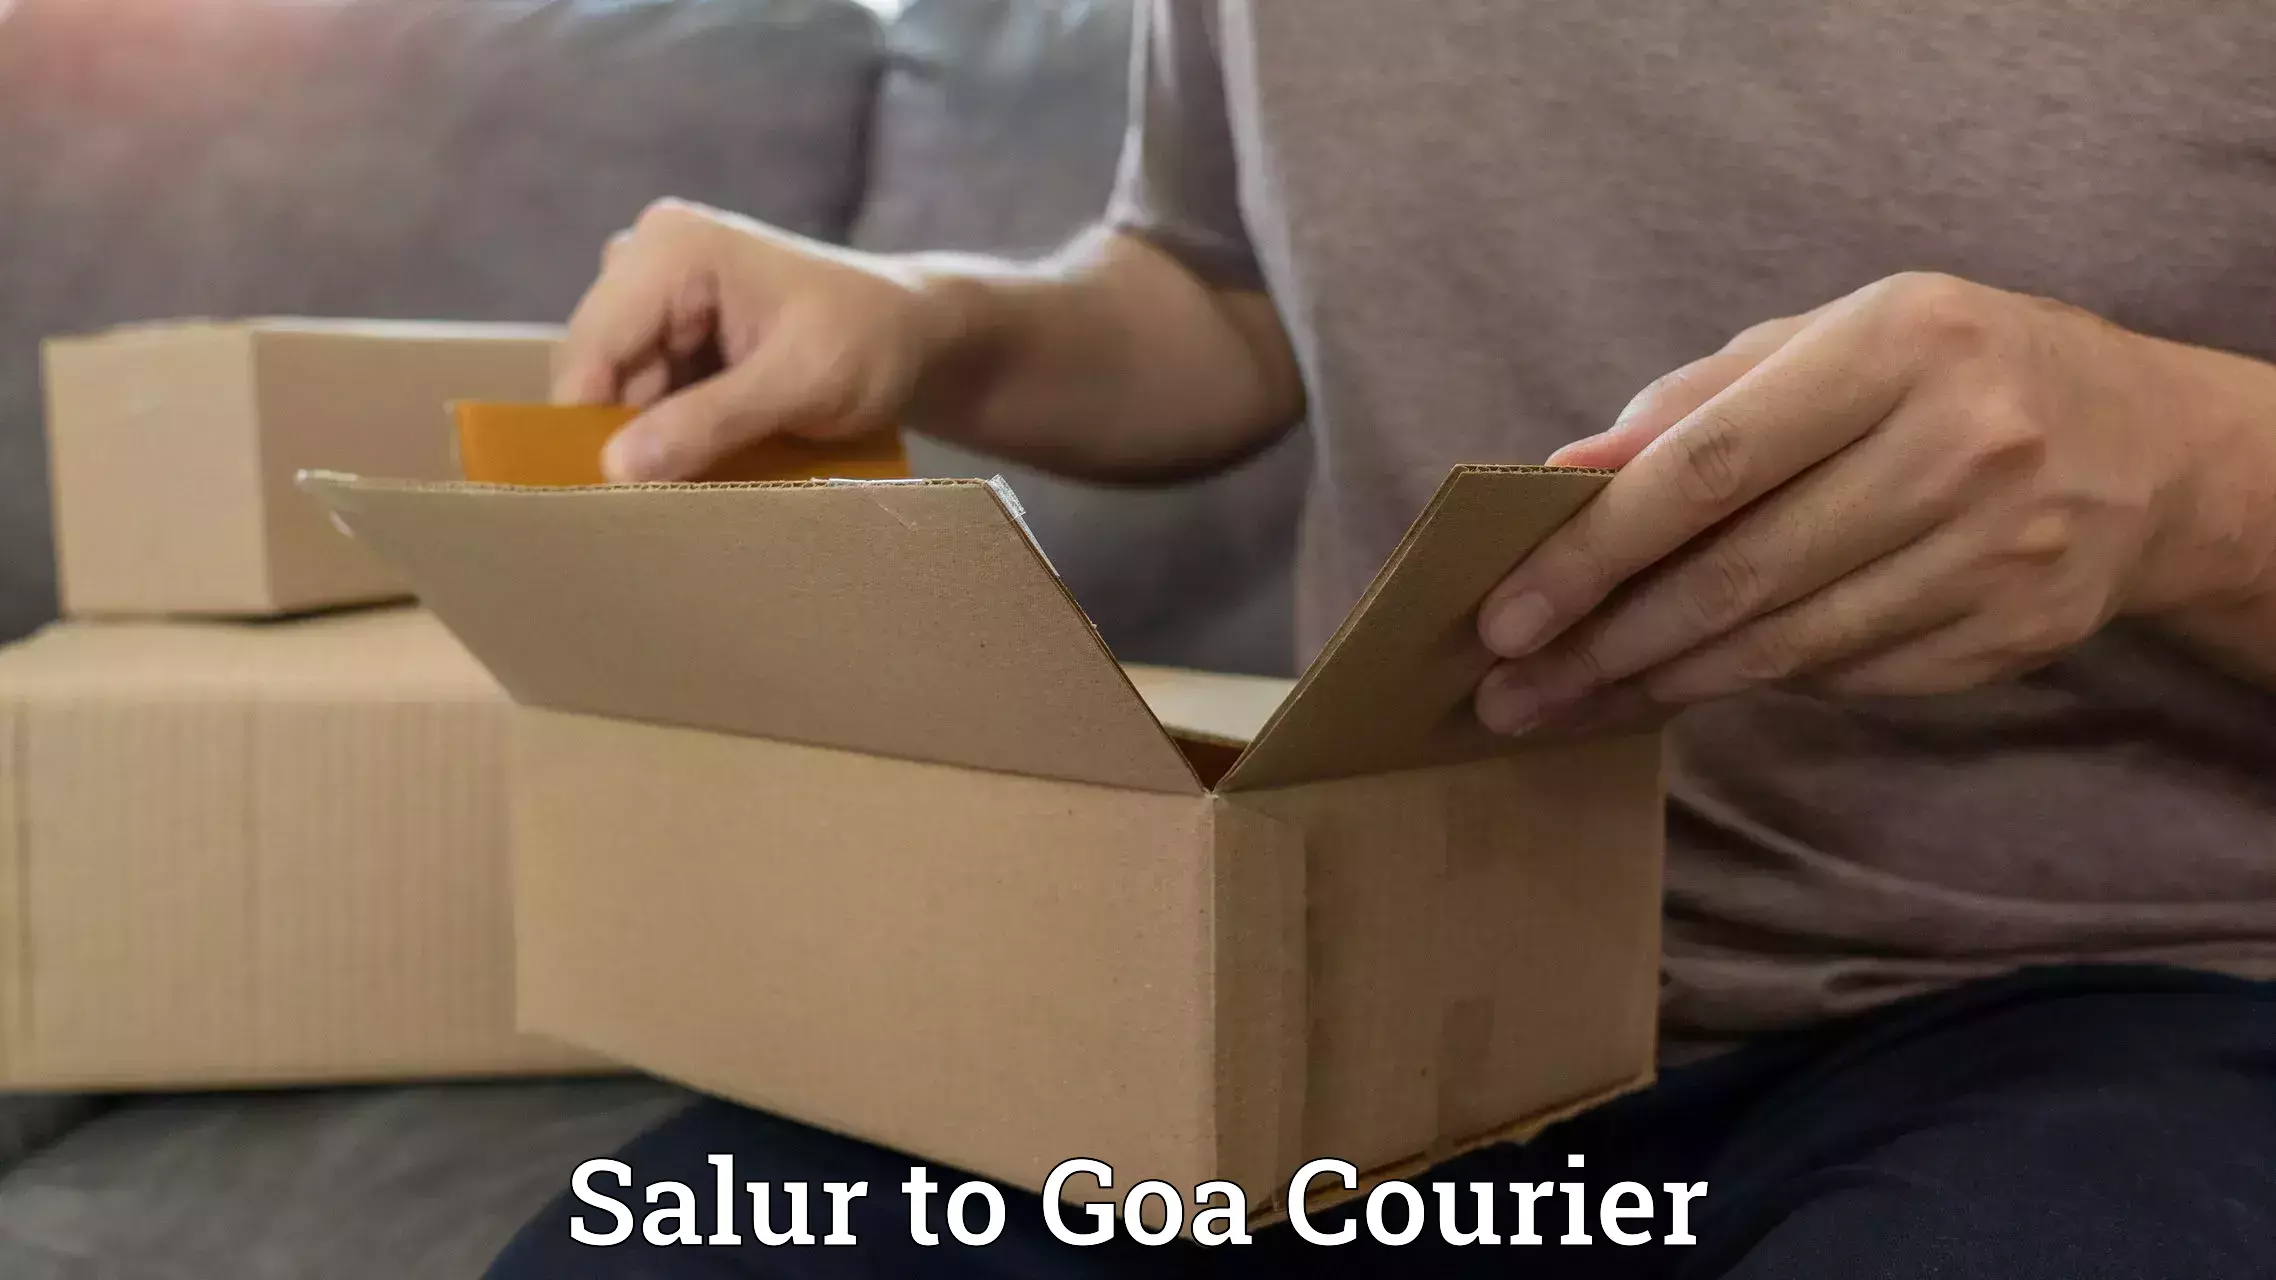 High-priority parcel service Salur to Goa